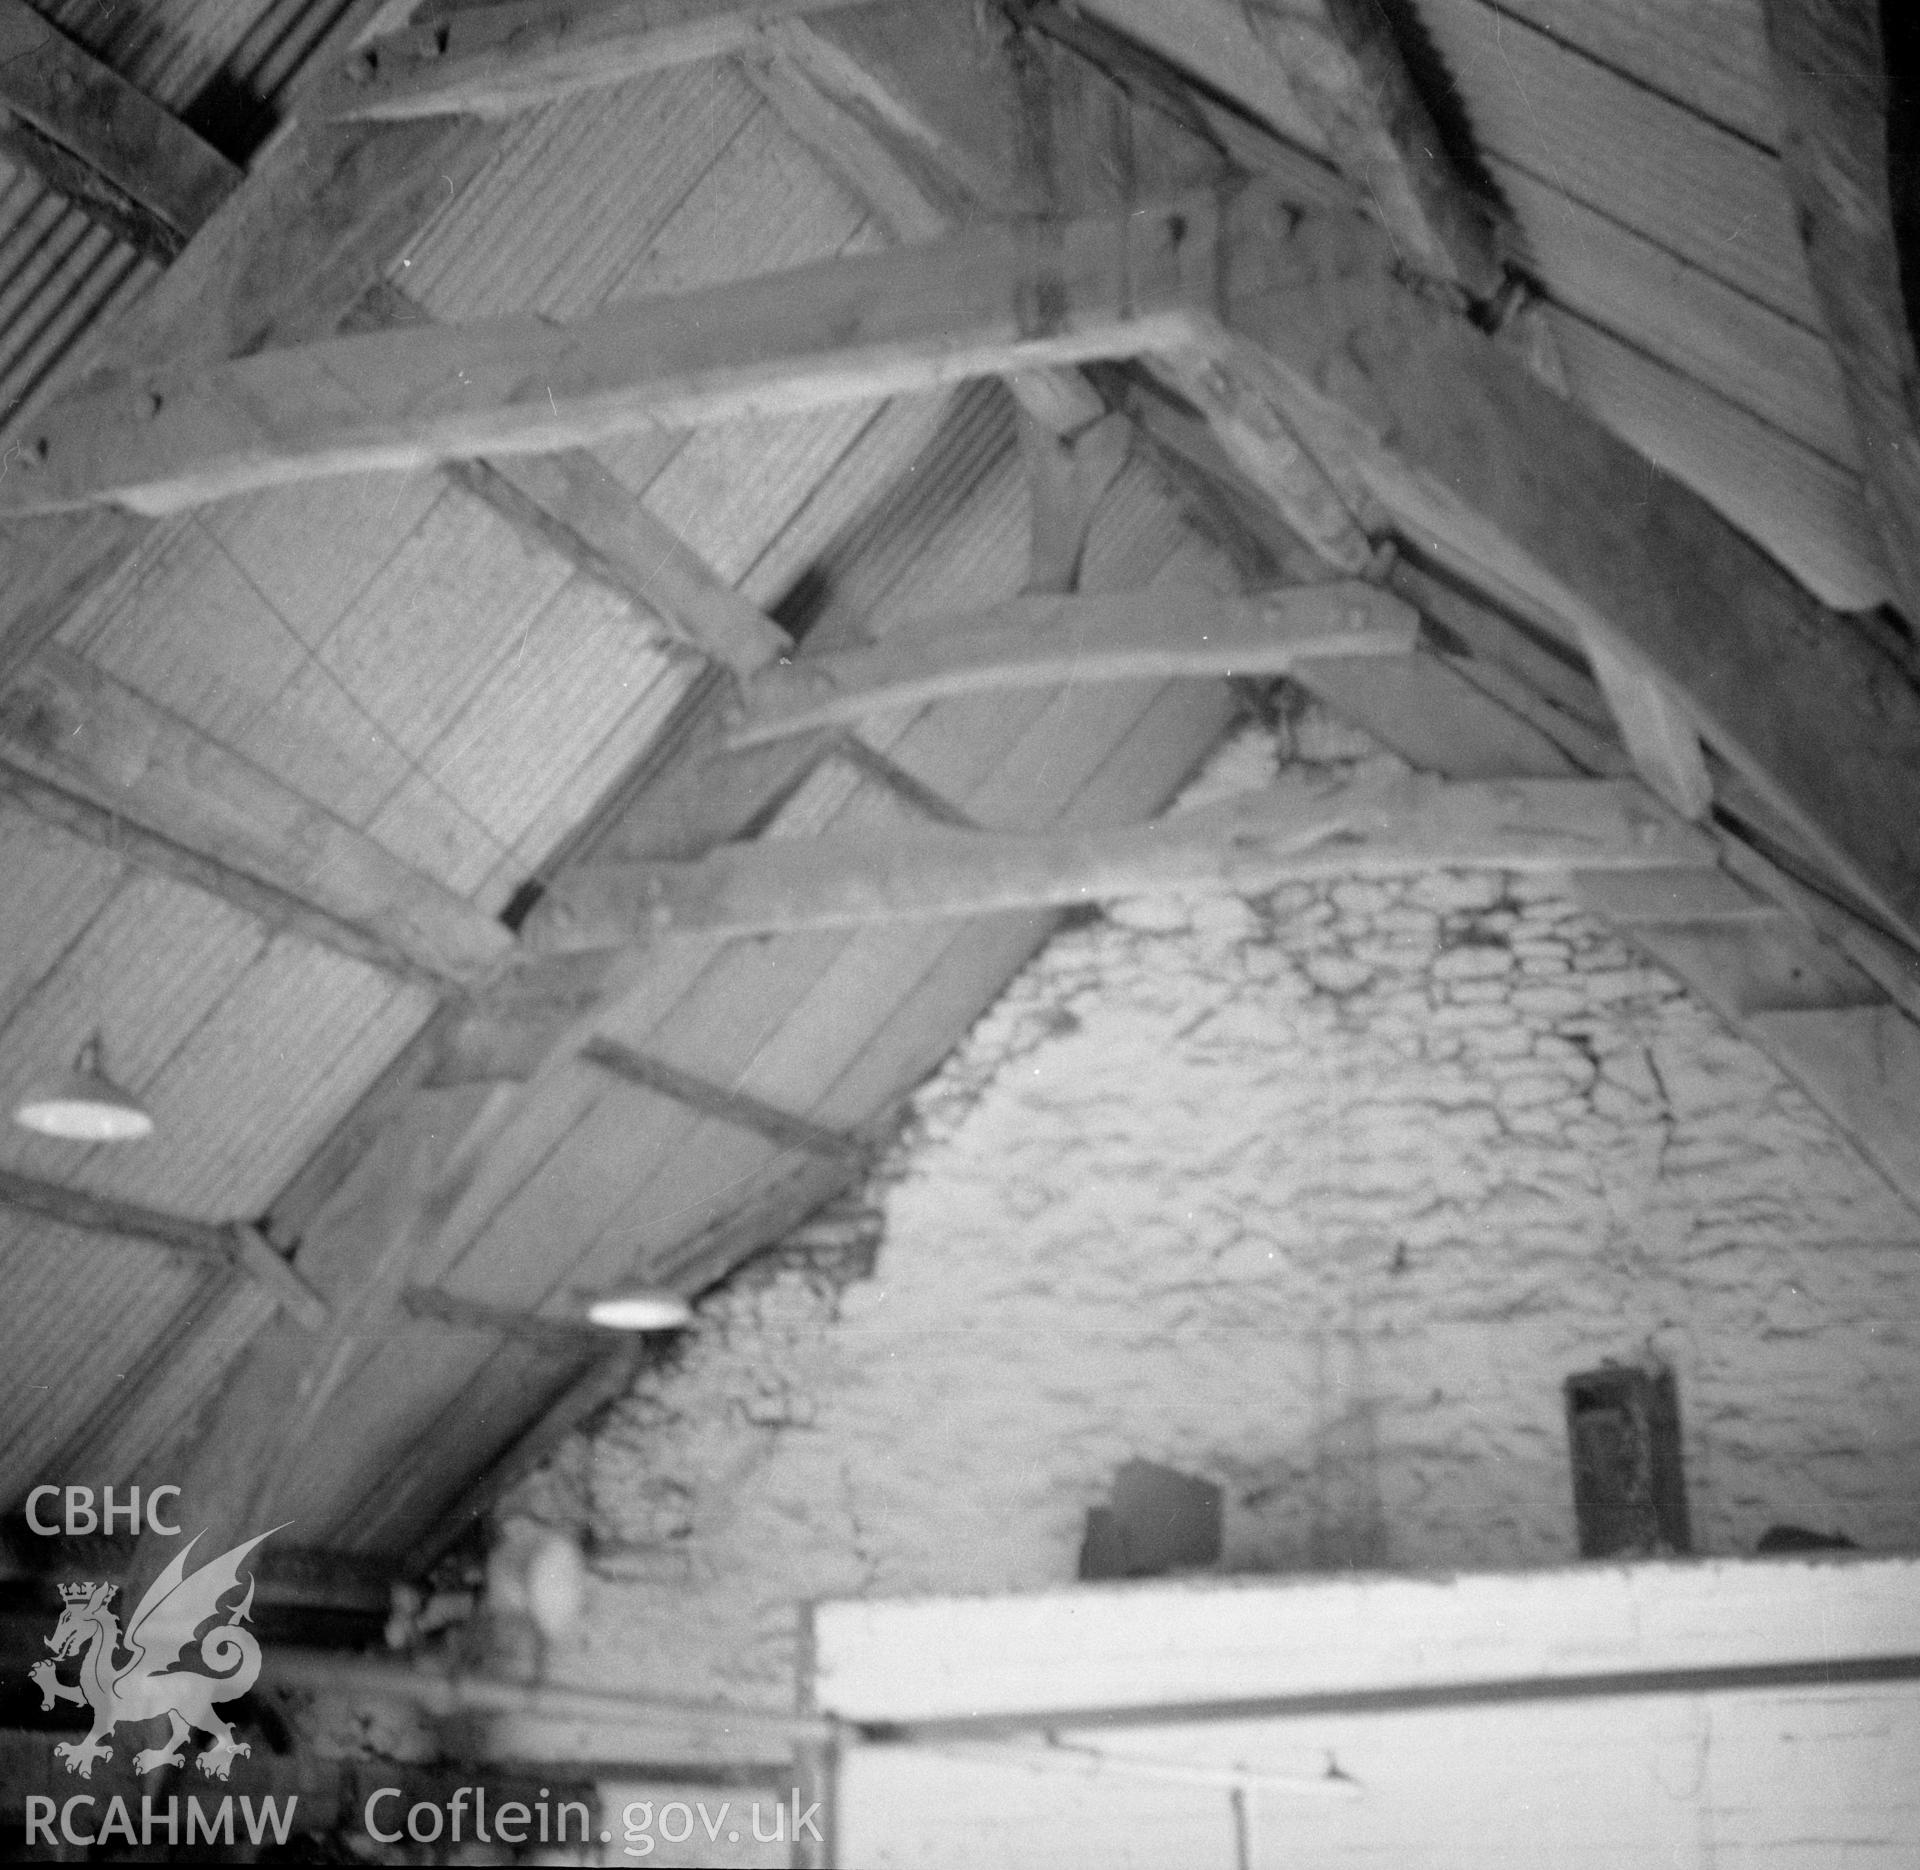 Digital copy of a nitrate negative showing interior view of the cruck barn at Maes y Rhiw, Llansadwrn.